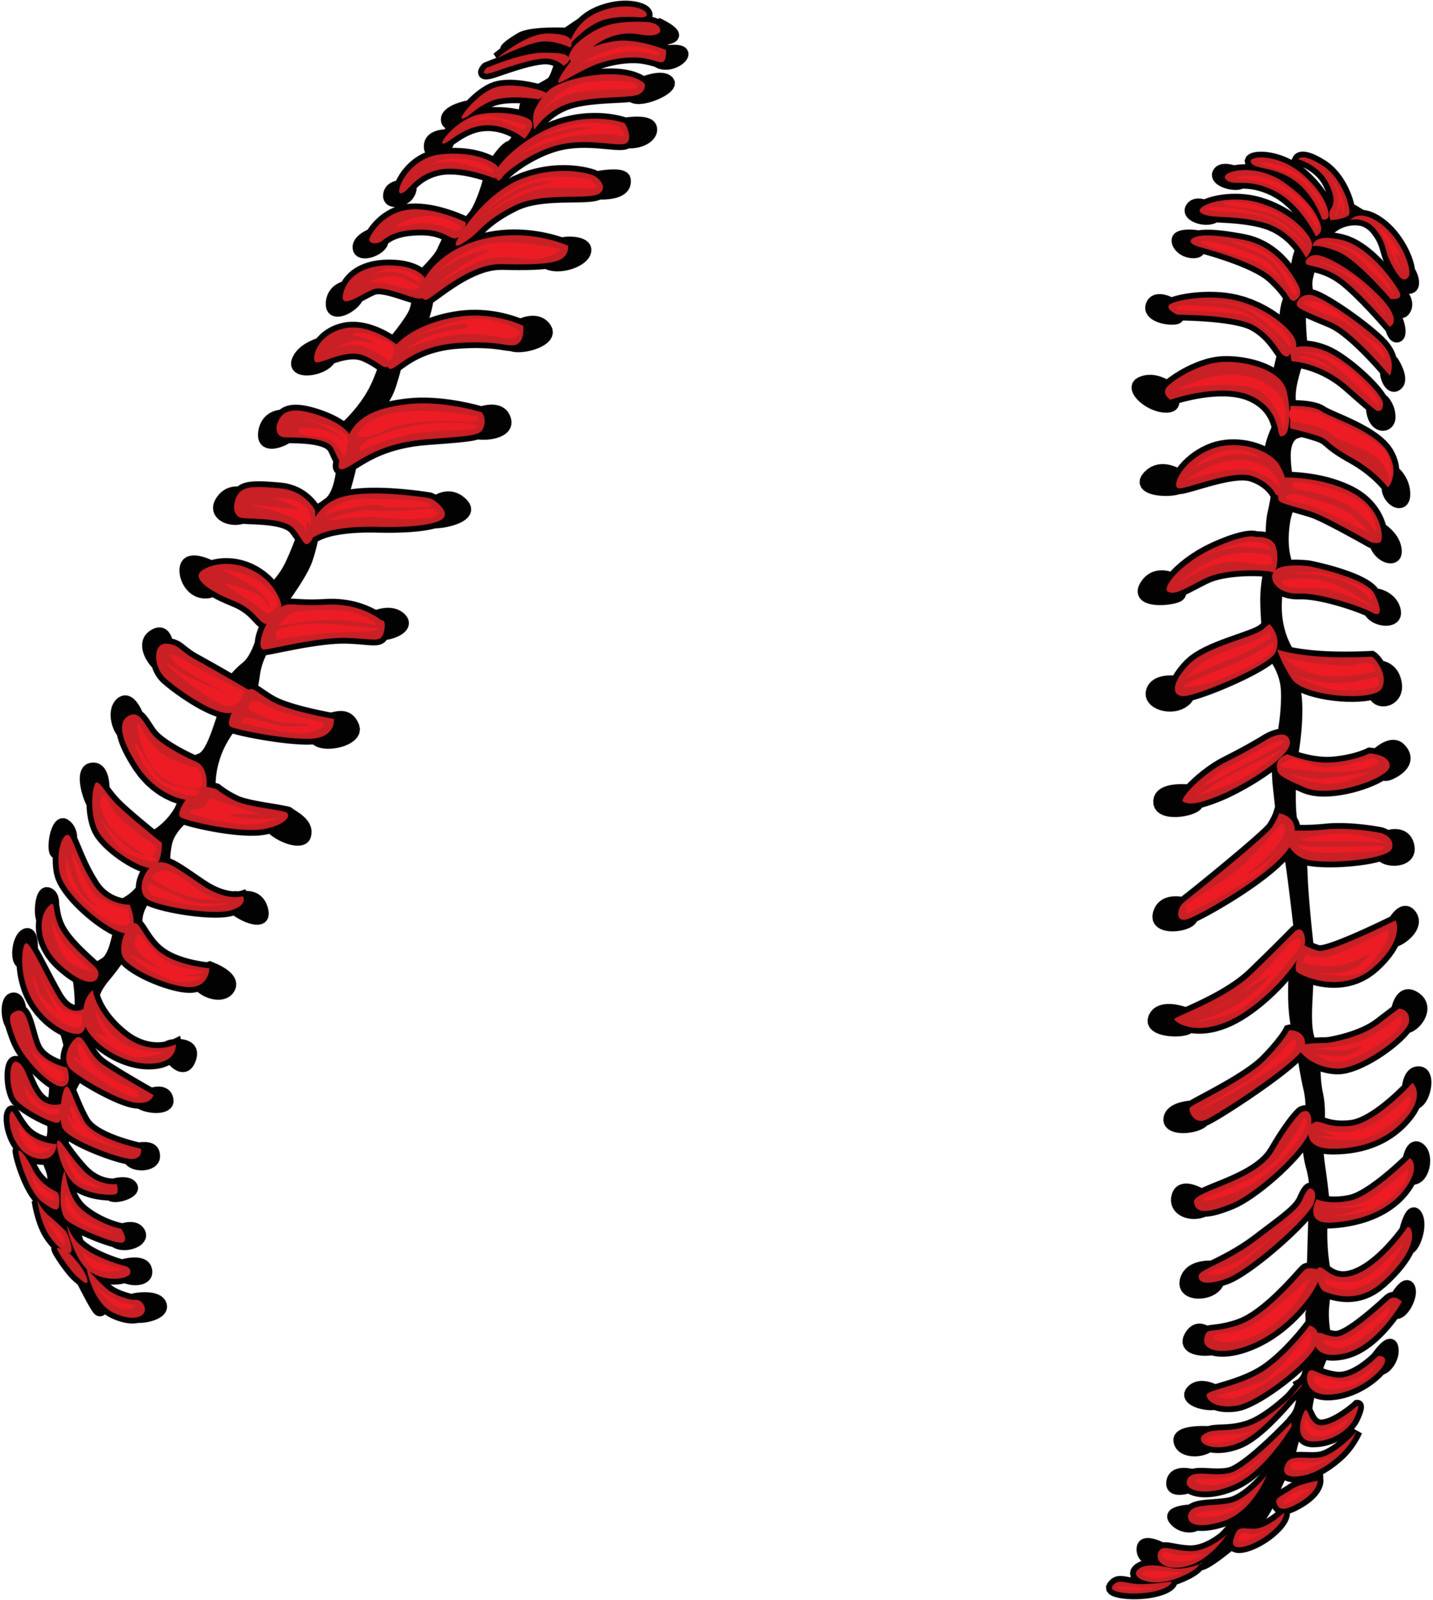 Vector Illustration of Softball Laces or Baseball Laces